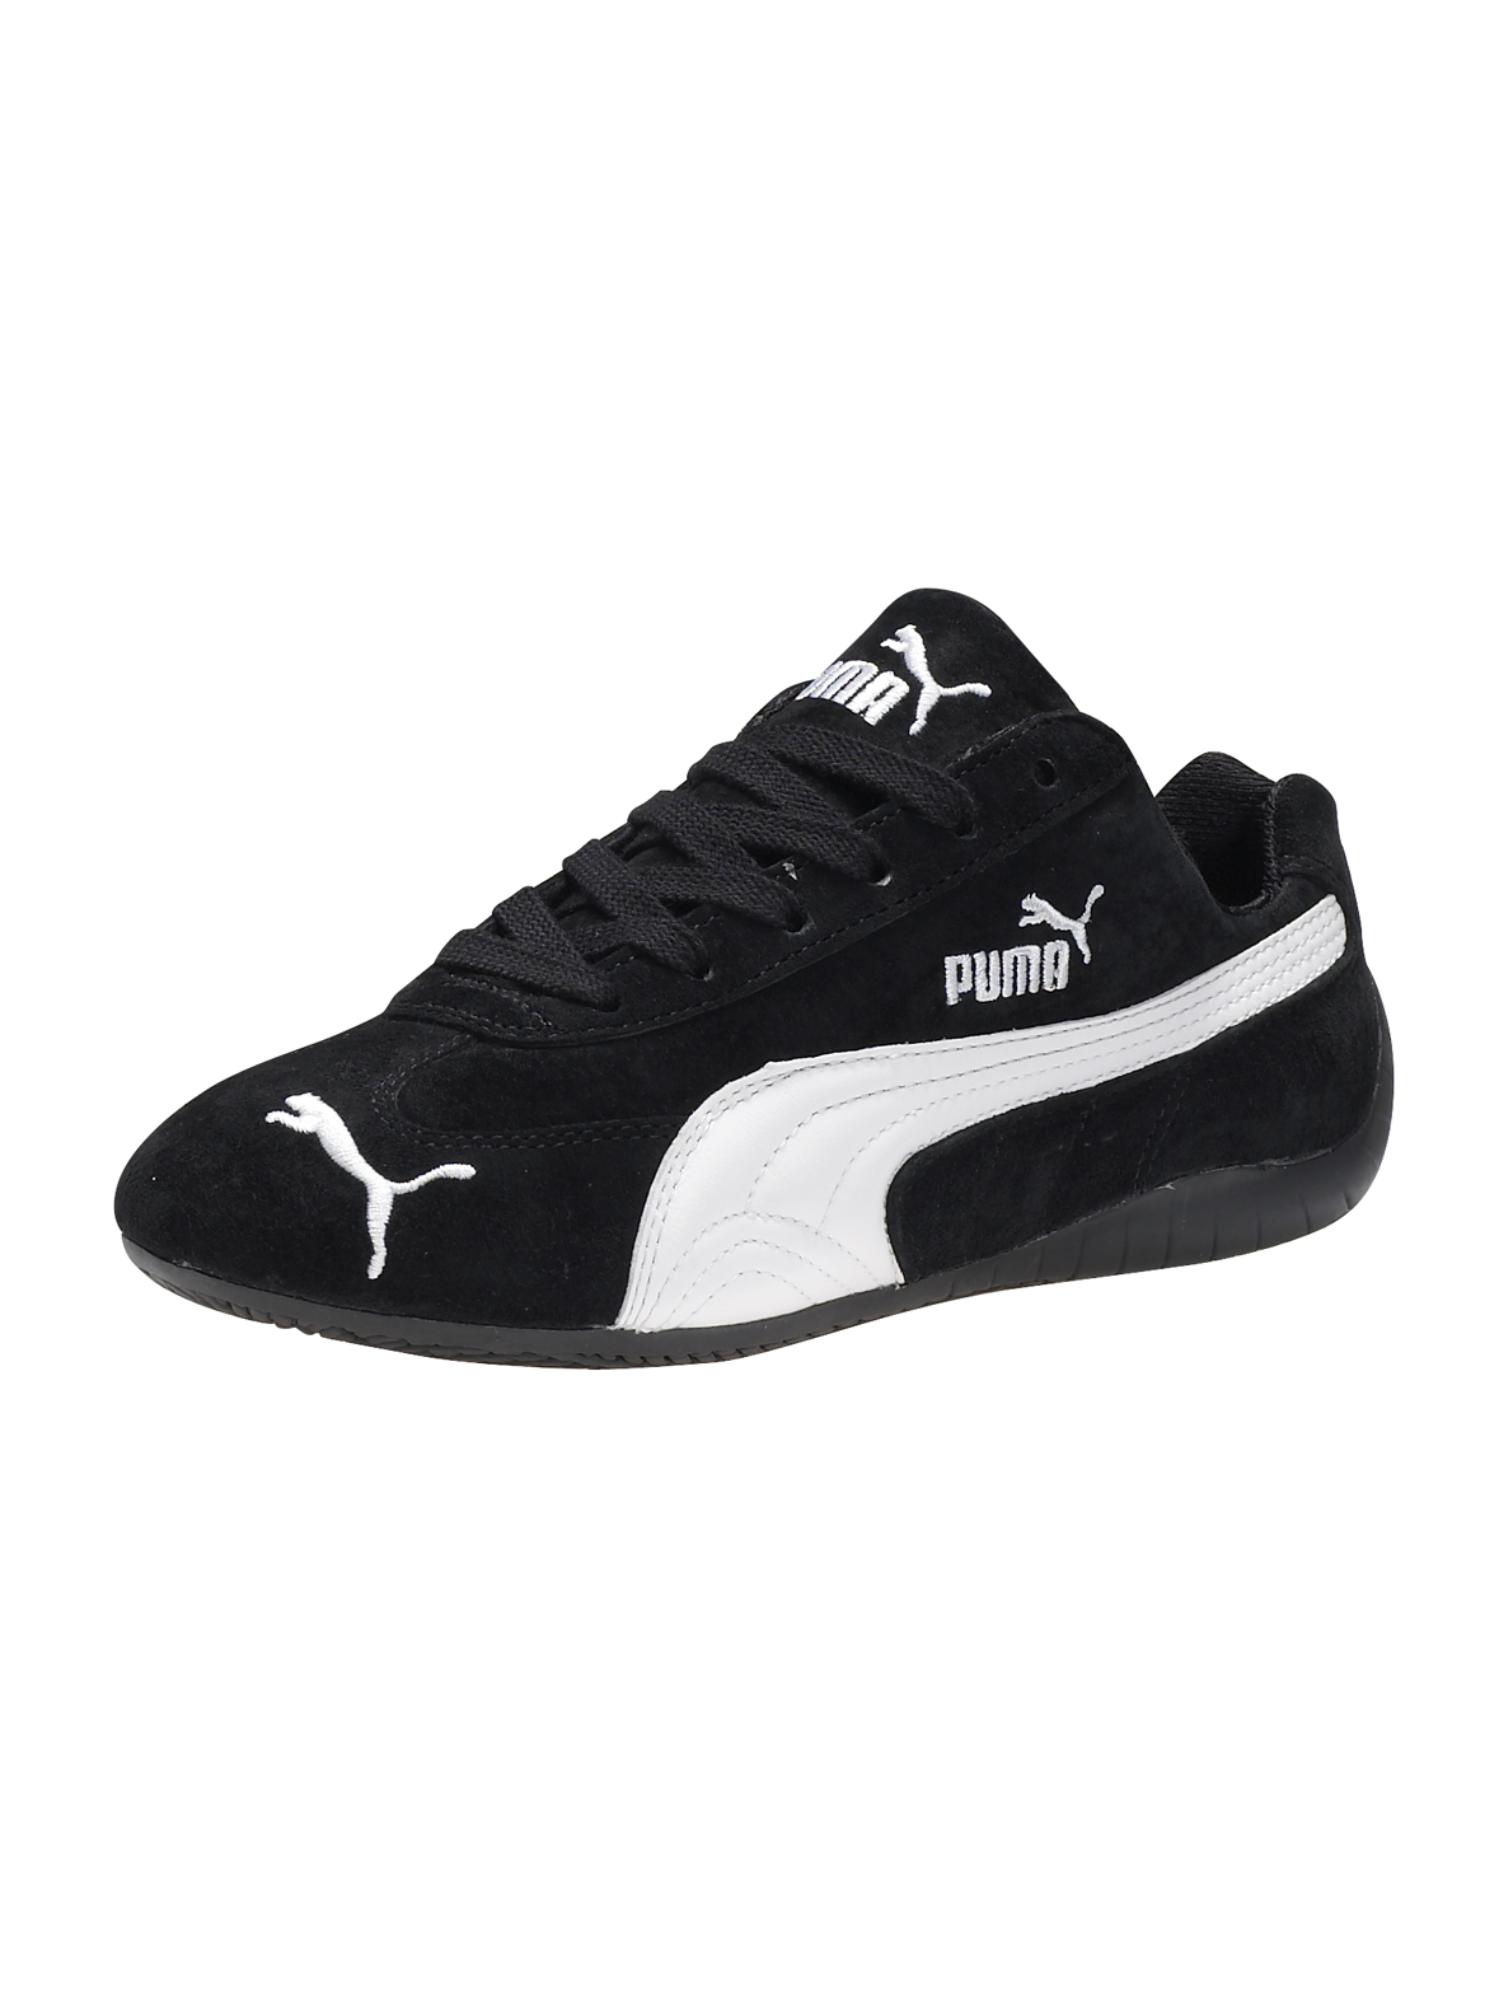 Puma Speed Cat SD Shoes for Women in 